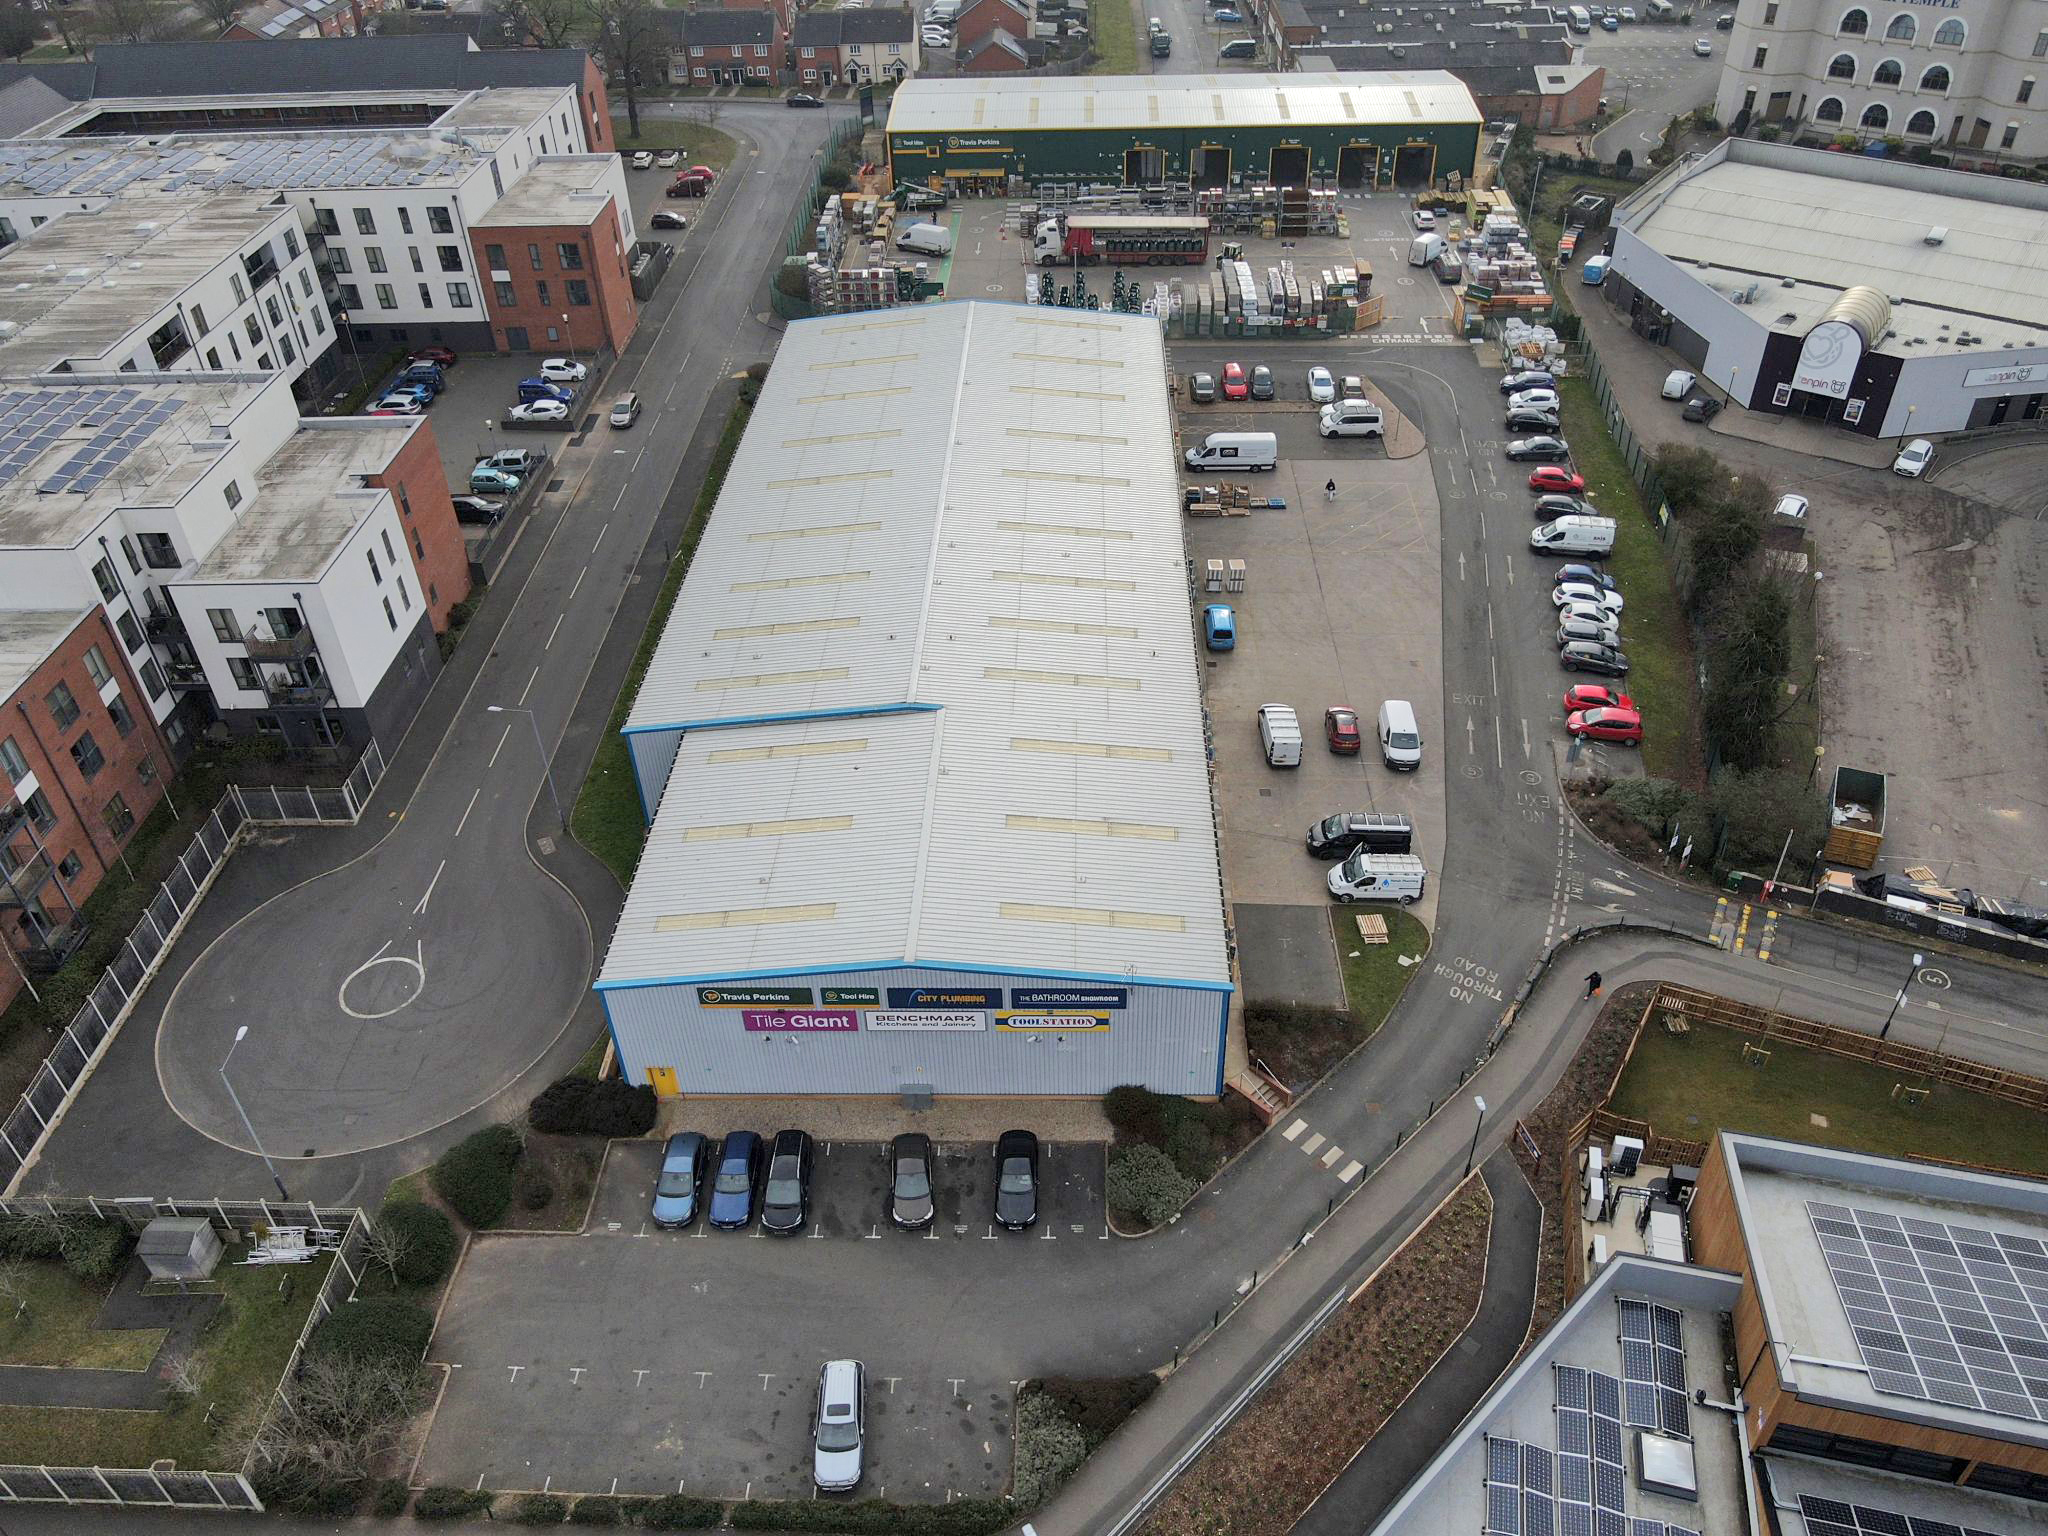 The Shires Gate Trade Park Acquisition